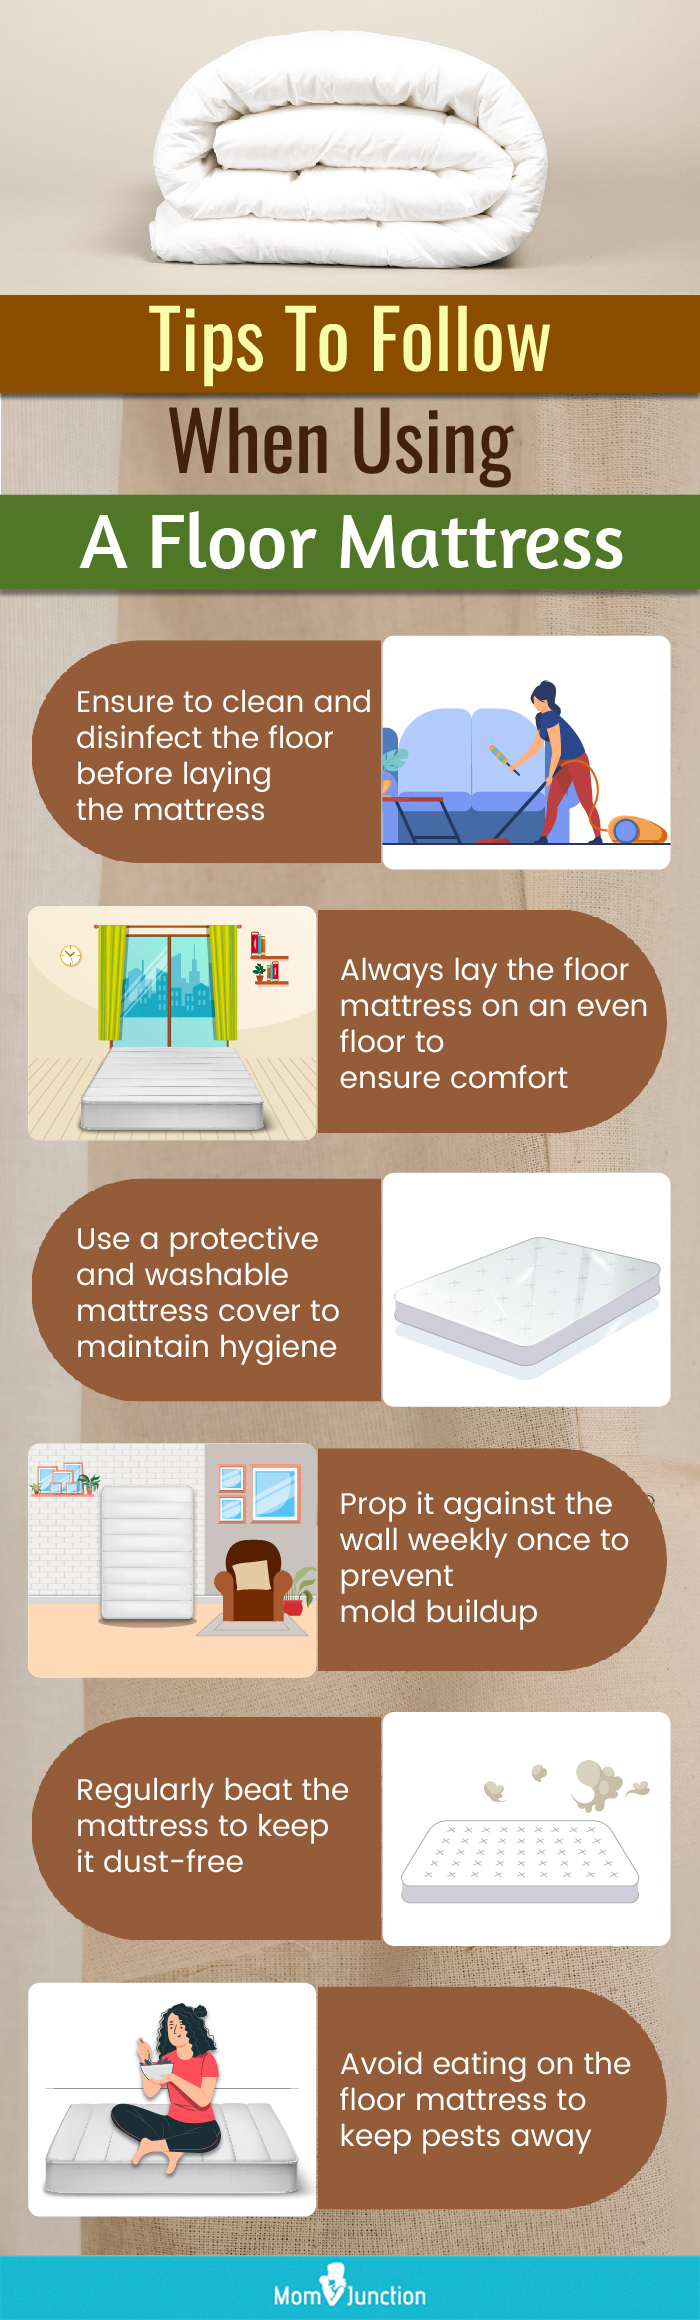 Tips To Follow When Using A Floor Mattress (infographic)